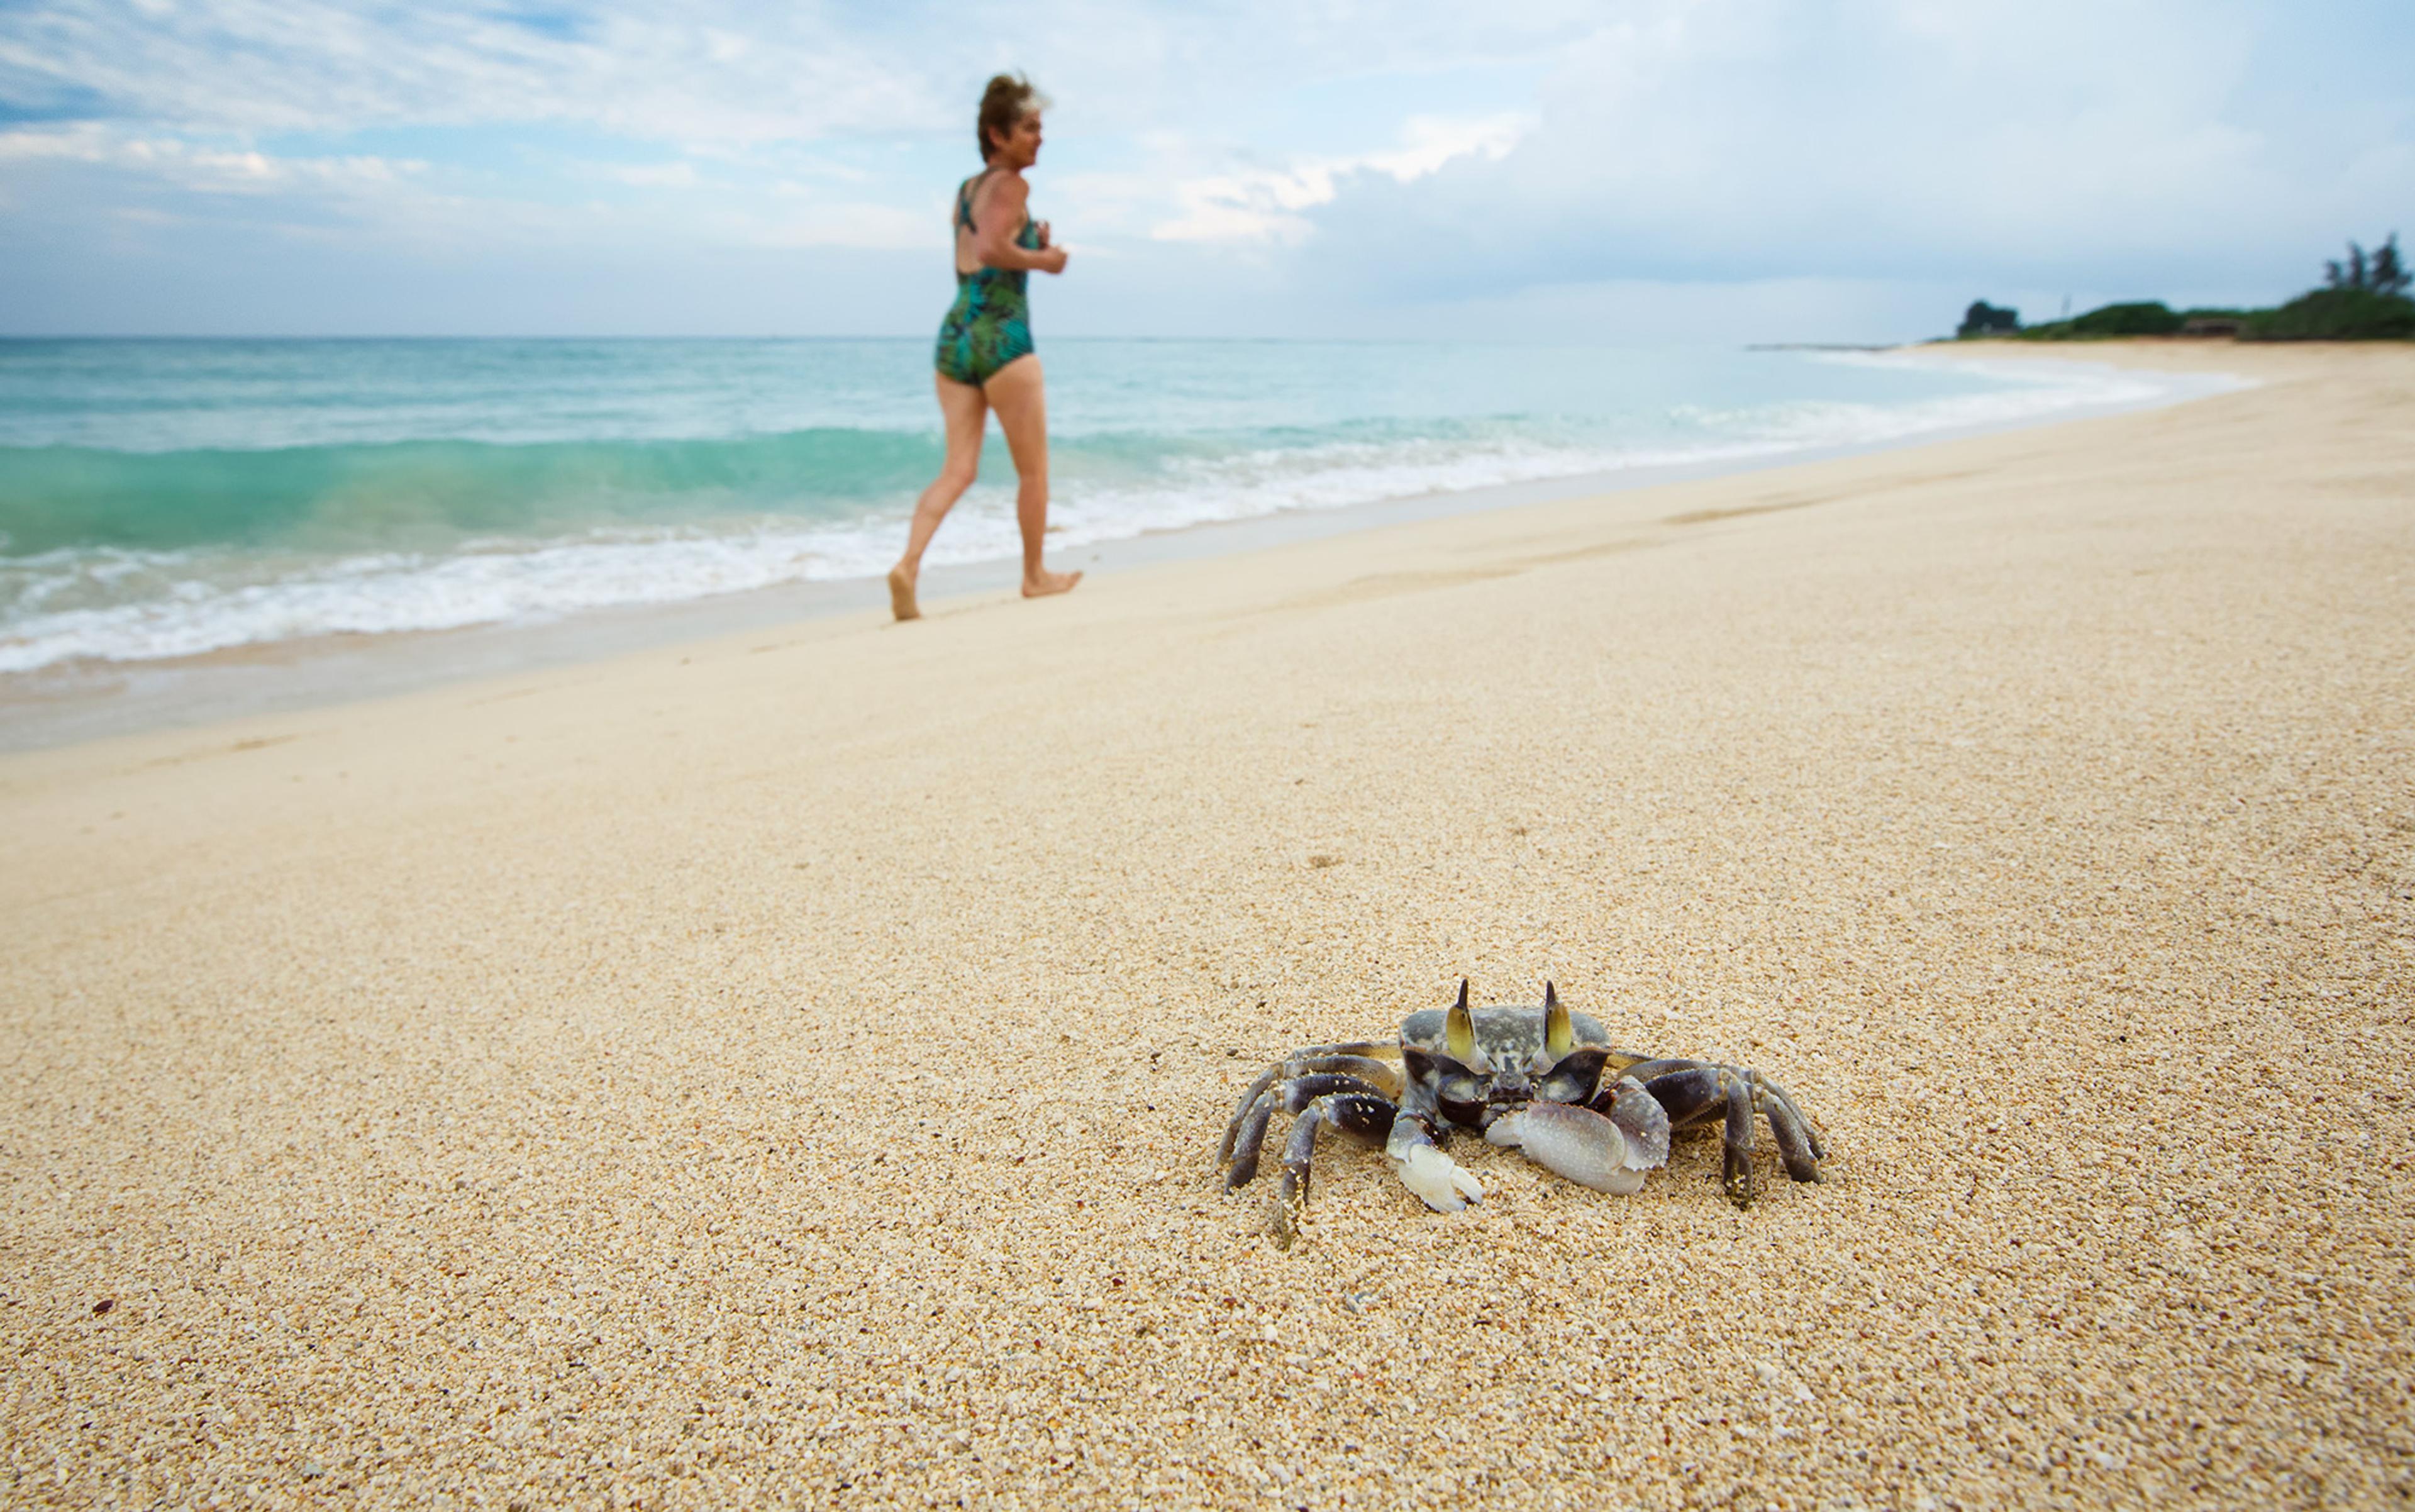 A crab is seen on a sandy beach. In the background and out of focus is a woman in a swimsuit